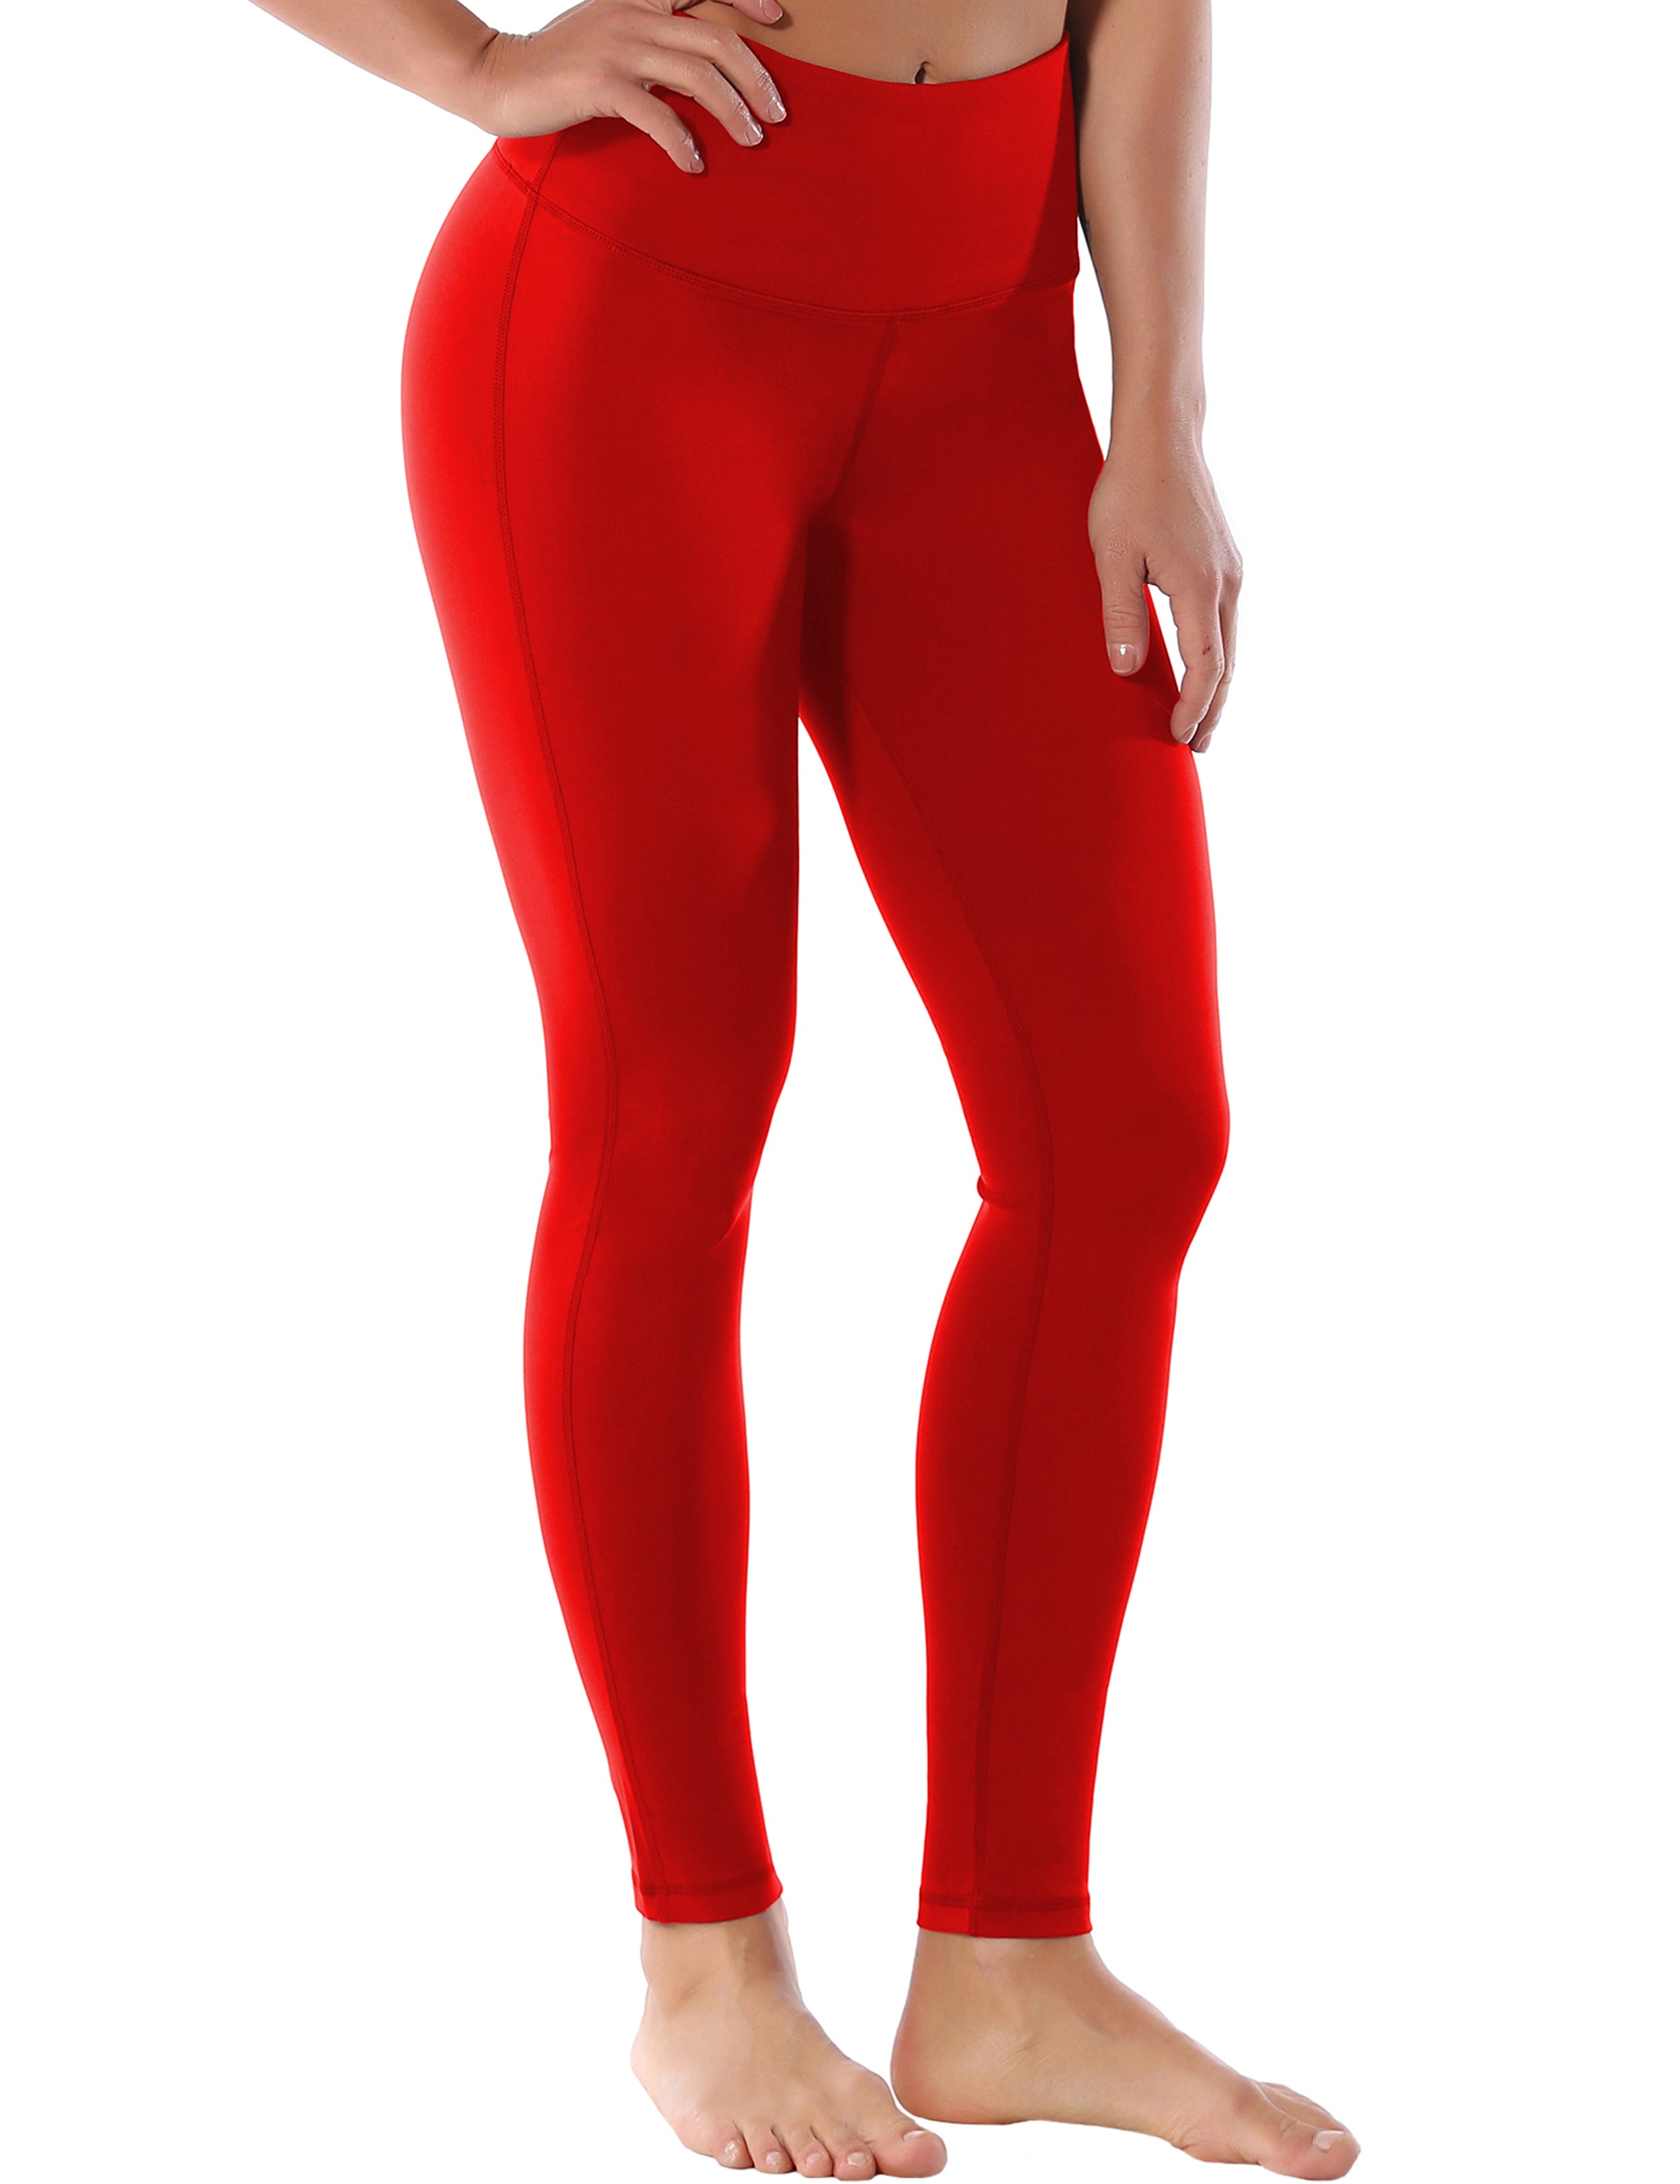 High Waist Side Line Yoga Pants scarlet Side Line is Make Your Legs Look Longer and Thinner 75%Nylon/25%Spandex Fabric doesn't attract lint easily 4-way stretch No see-through Moisture-wicking Tummy control Inner pocket Two lengths